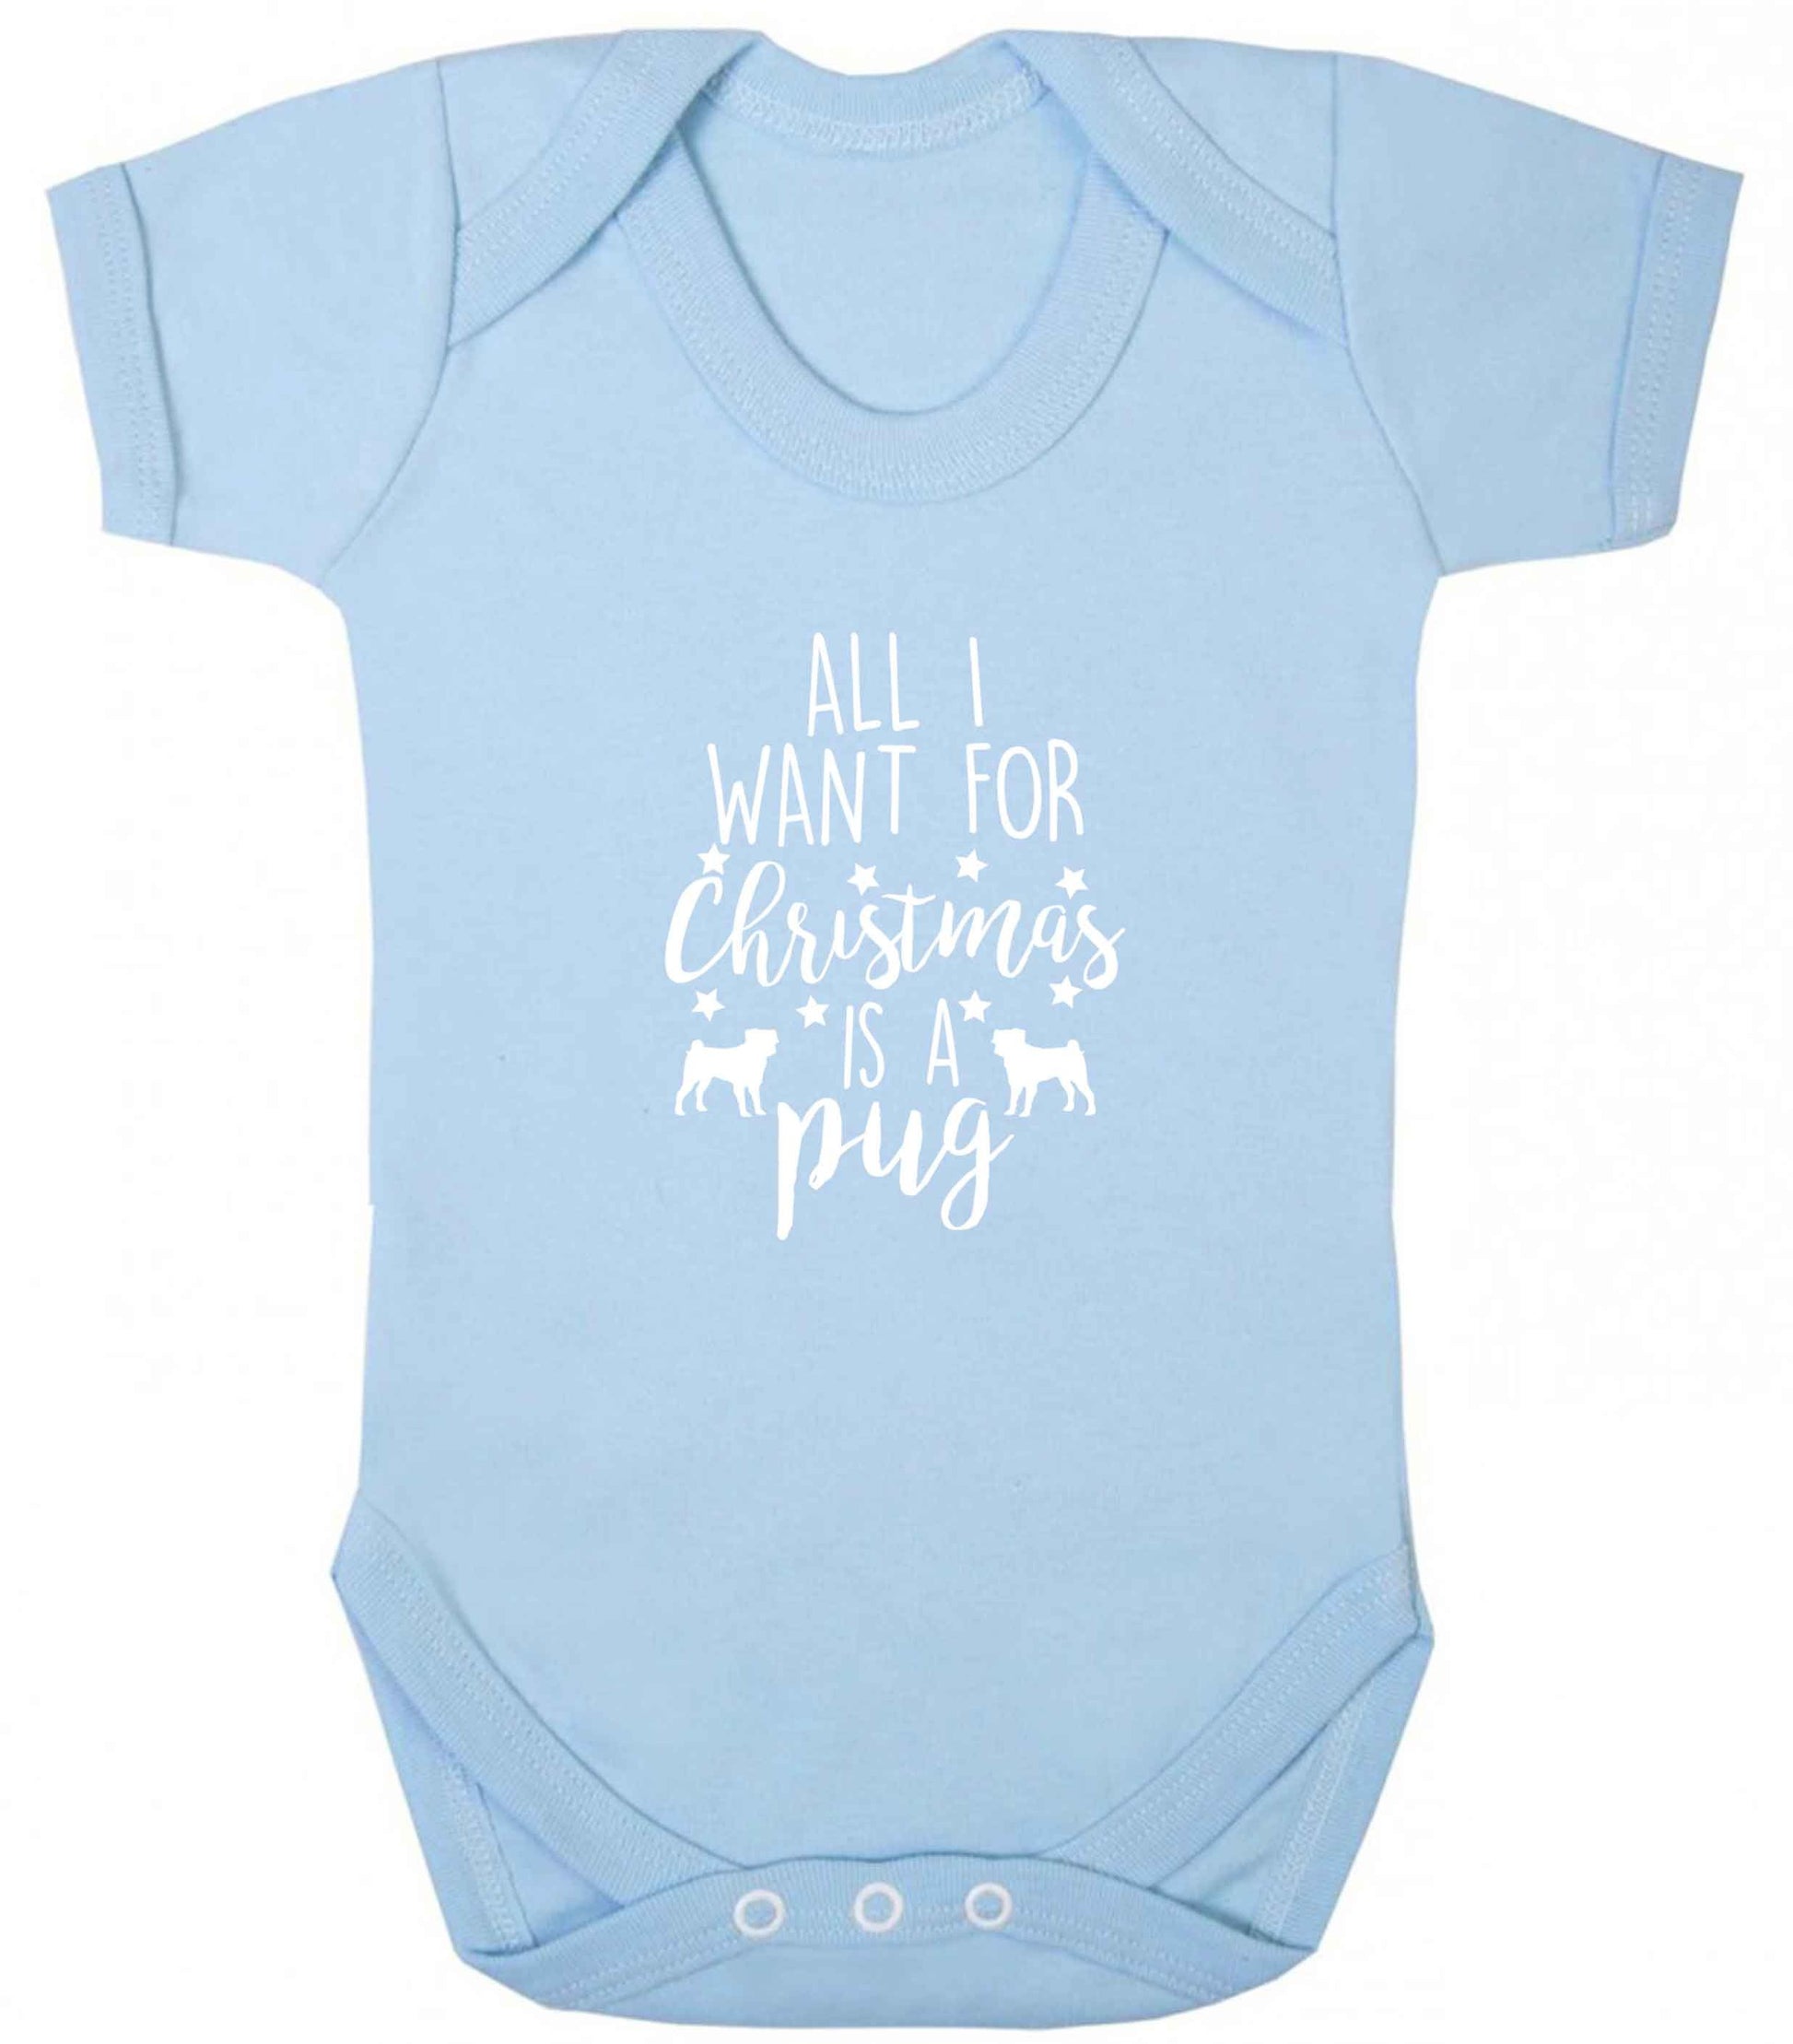 All I want for Christmas is a pug baby vest pale blue 18-24 months